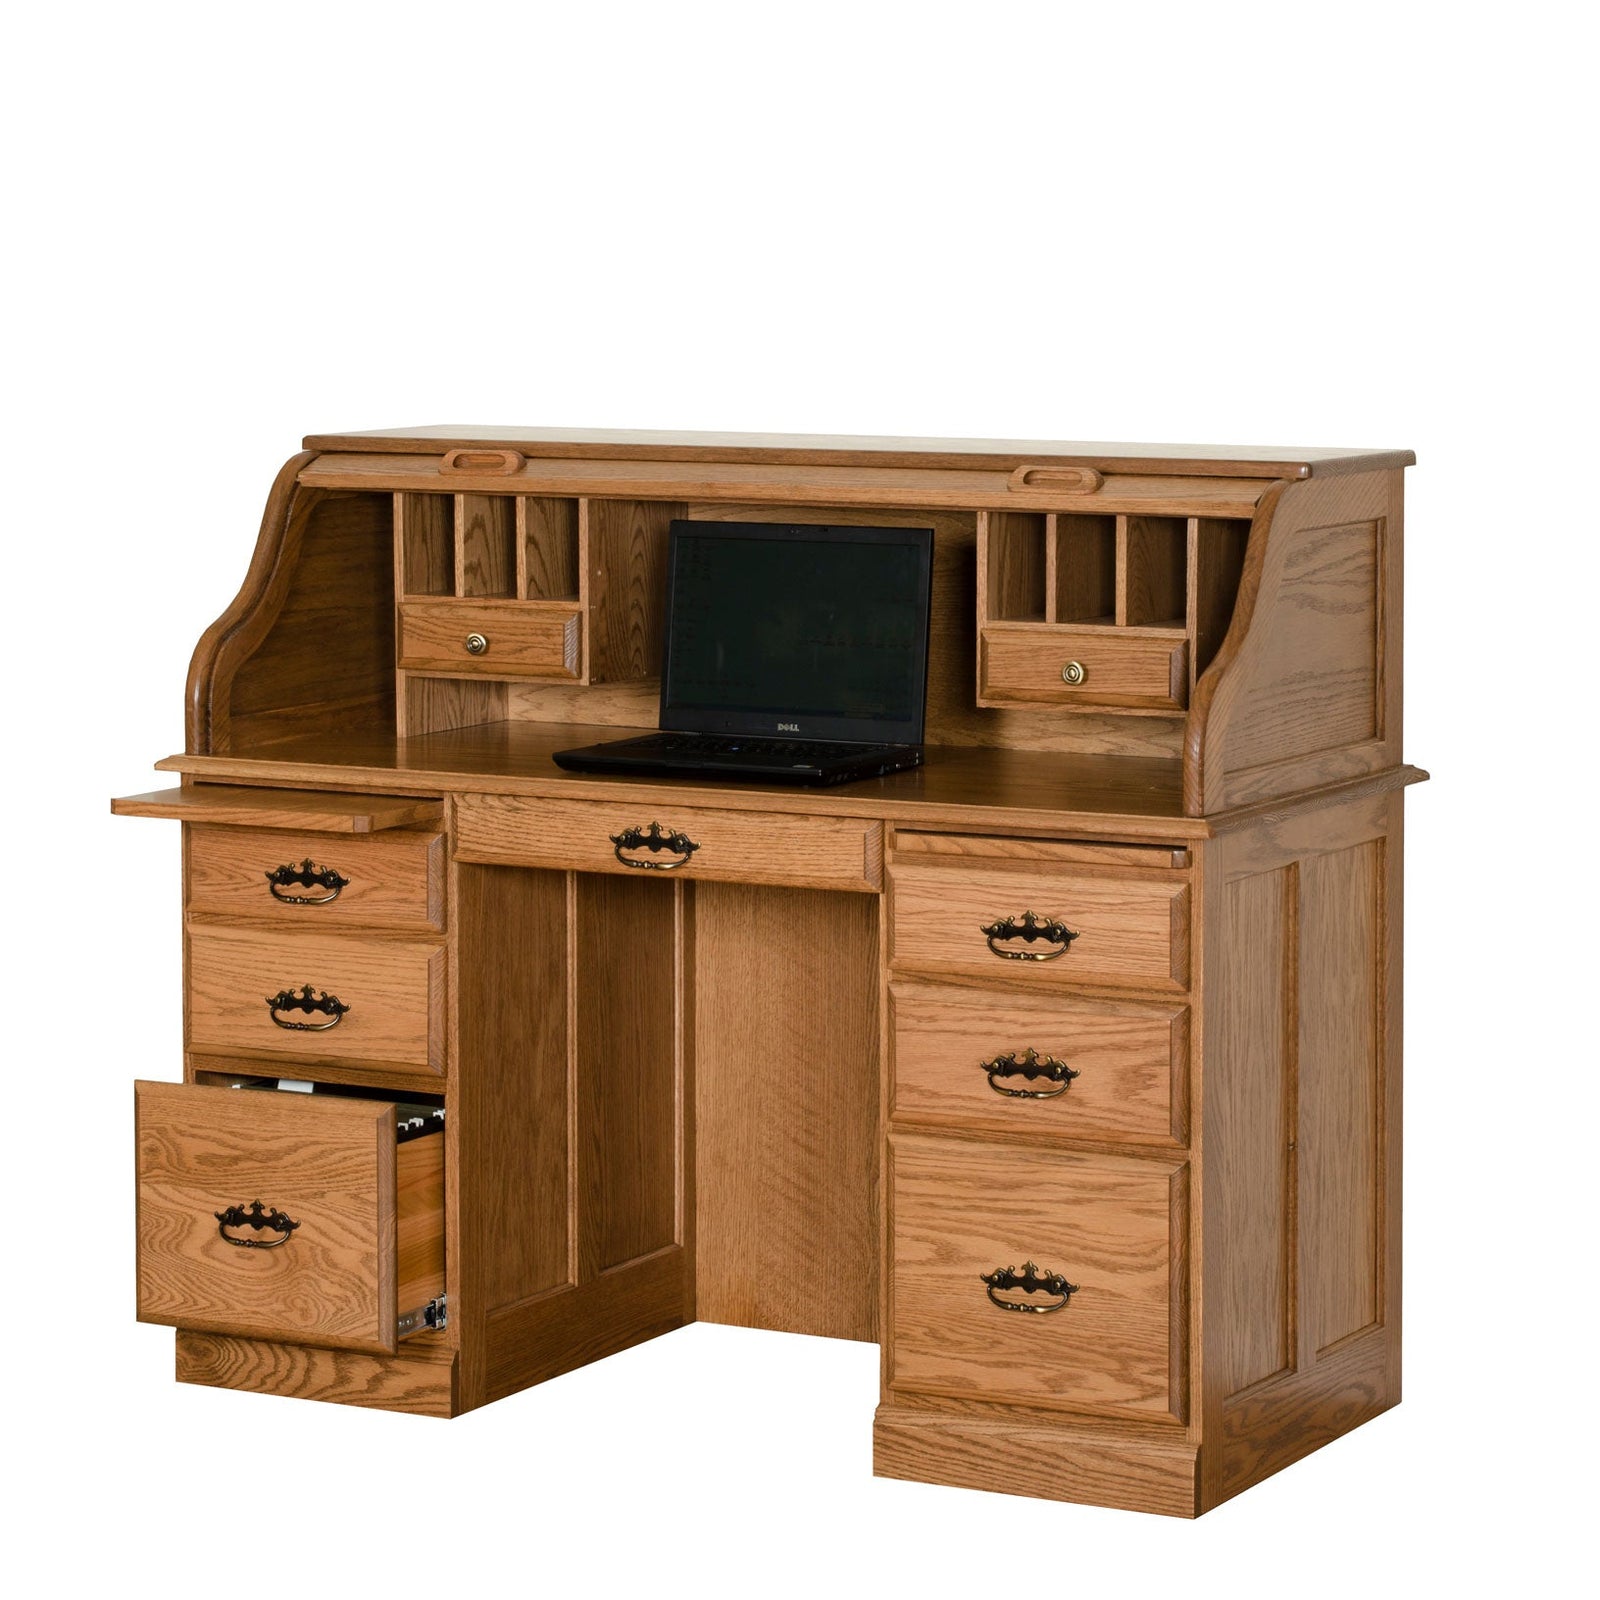 Quality Amish Roll Top Desks by DutchCrafters Amish Furniture